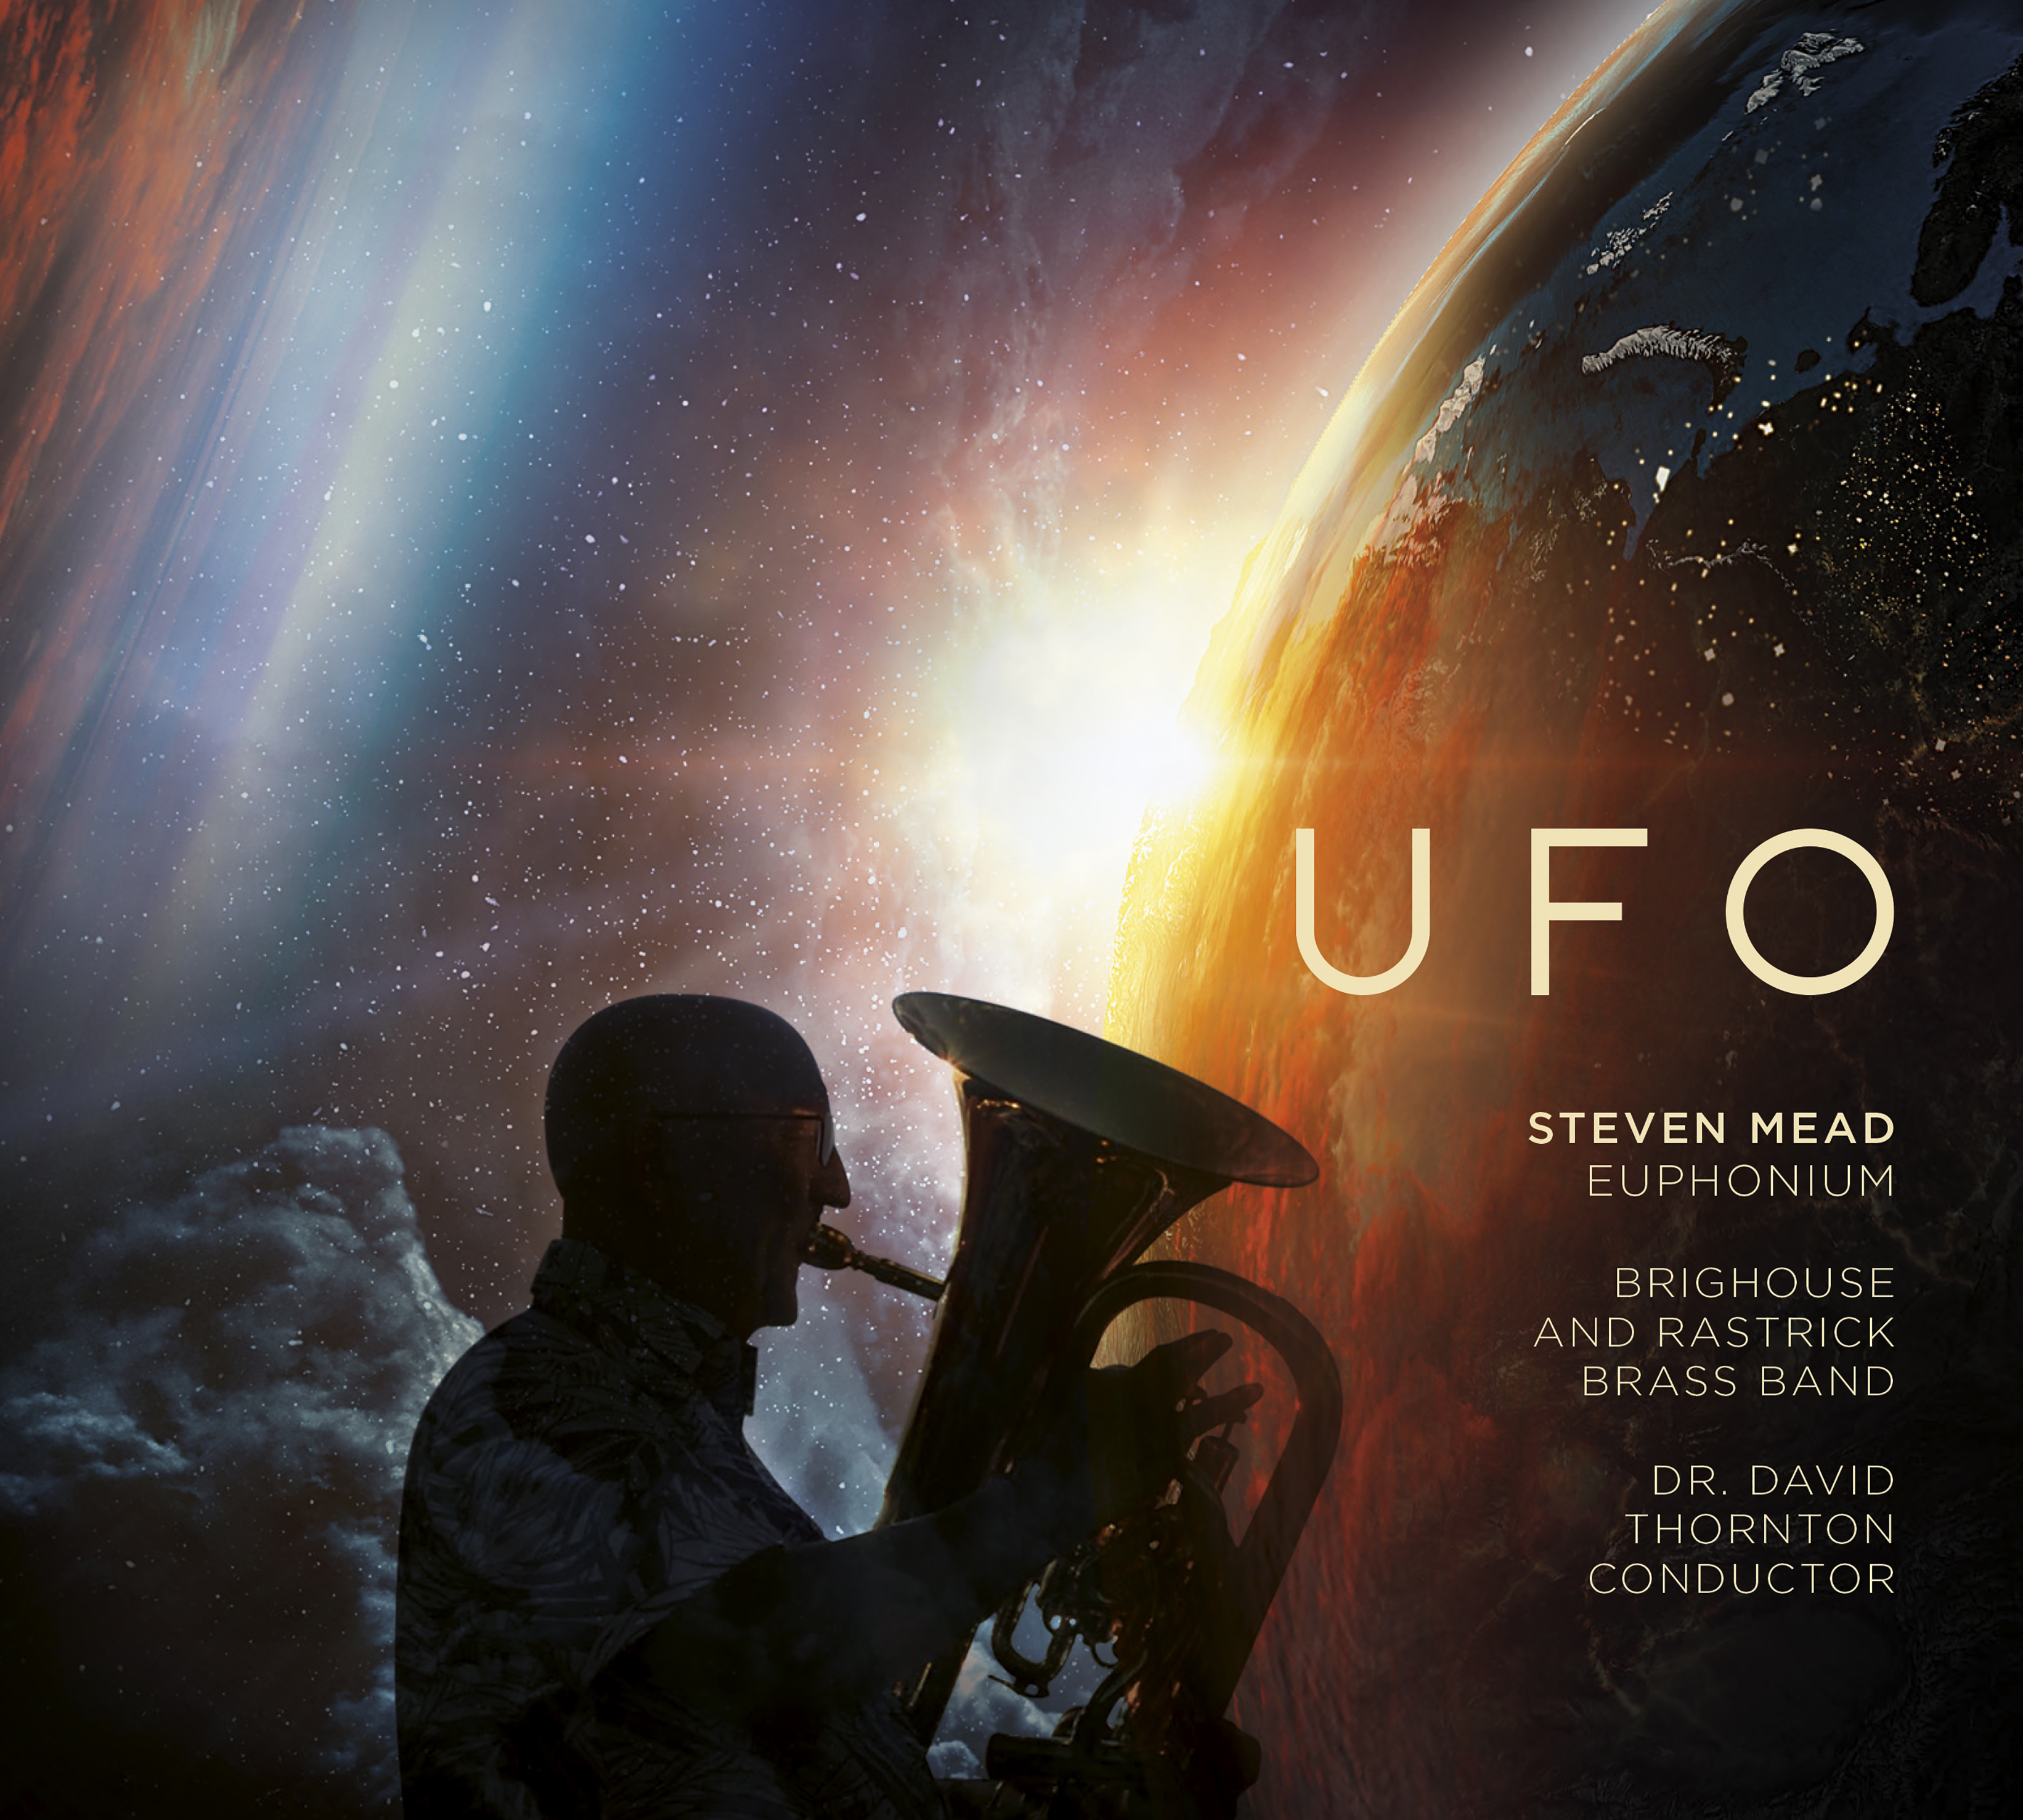  CD - UFO - Steven Mead and Brighouse and Rastrick Brass Band 